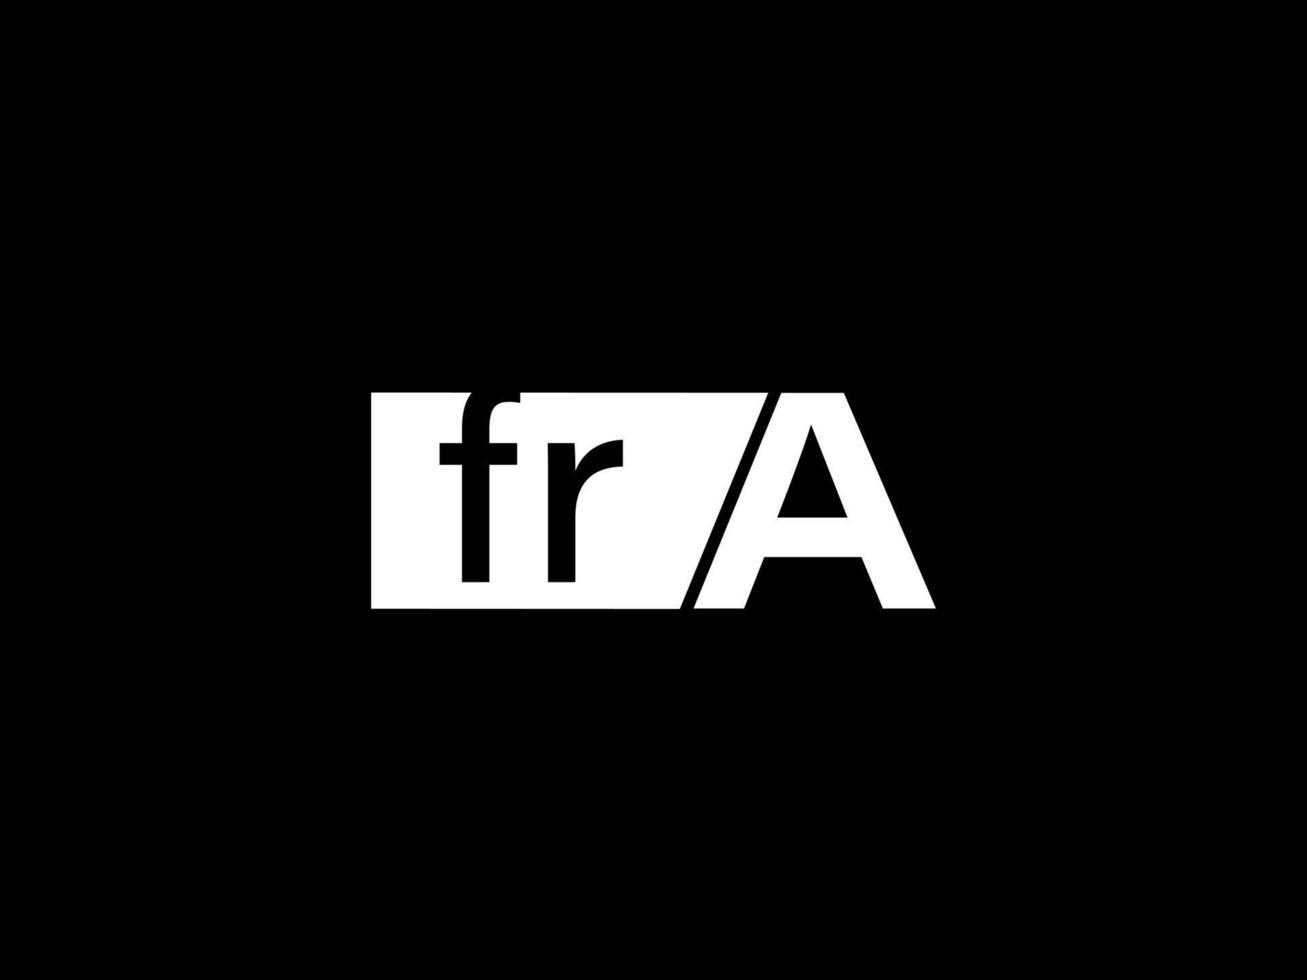 FRA Logo and Graphics design vector art, Icons isolated on black background